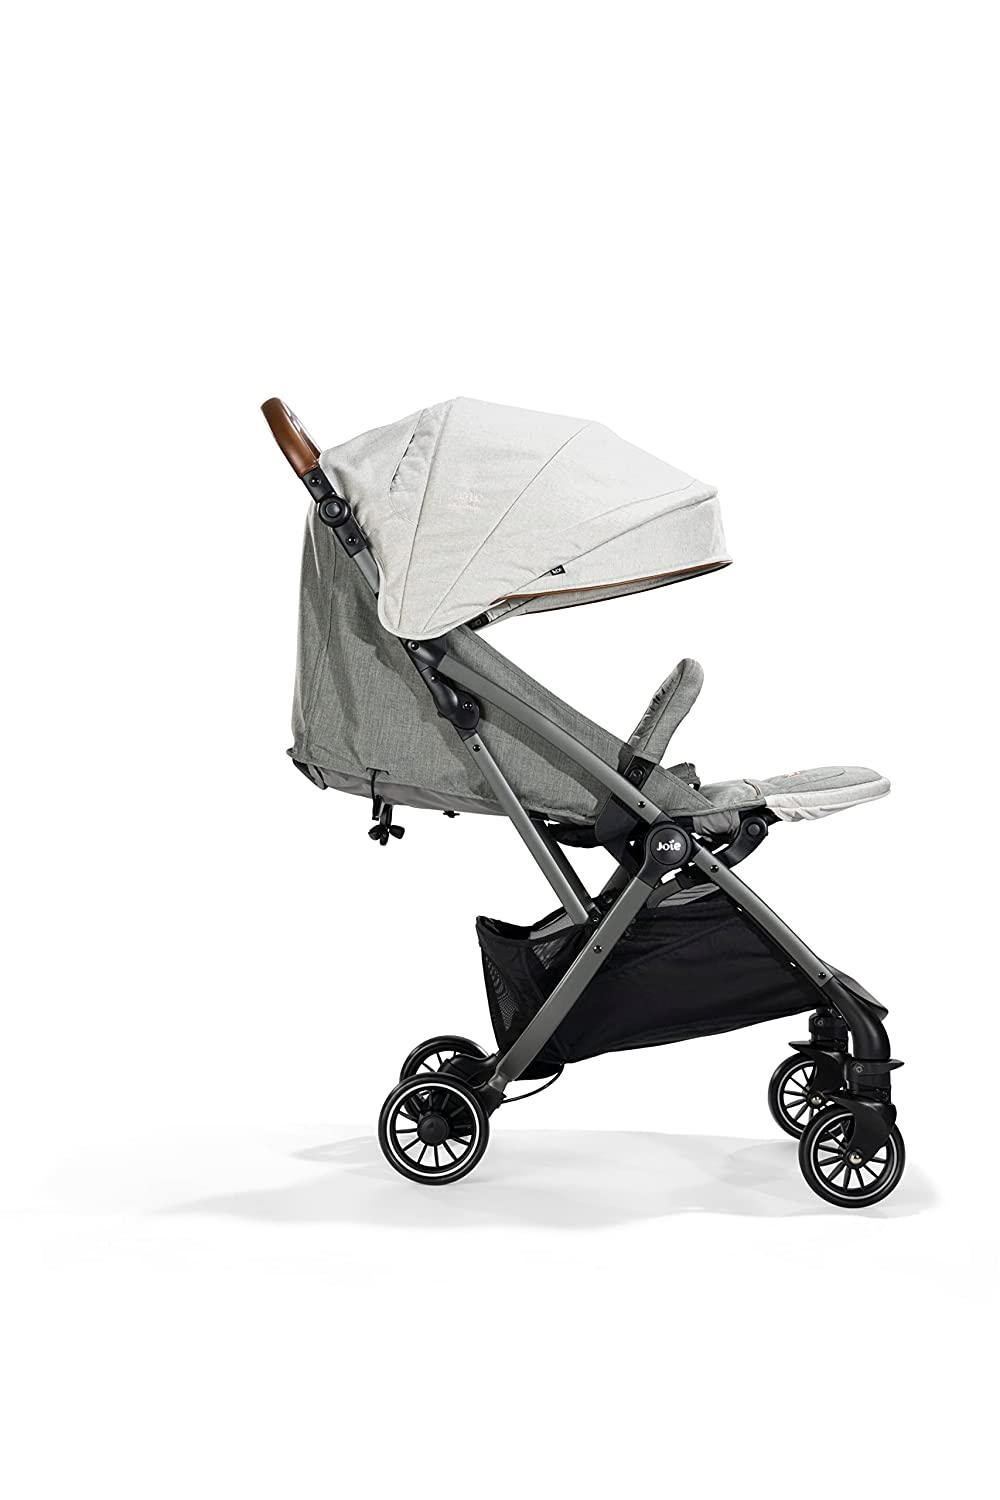 Joie Tourist Compact Lightweight Pram with 5-Point Harness LieFlat Recline 15 kg or 3 Years Oyster